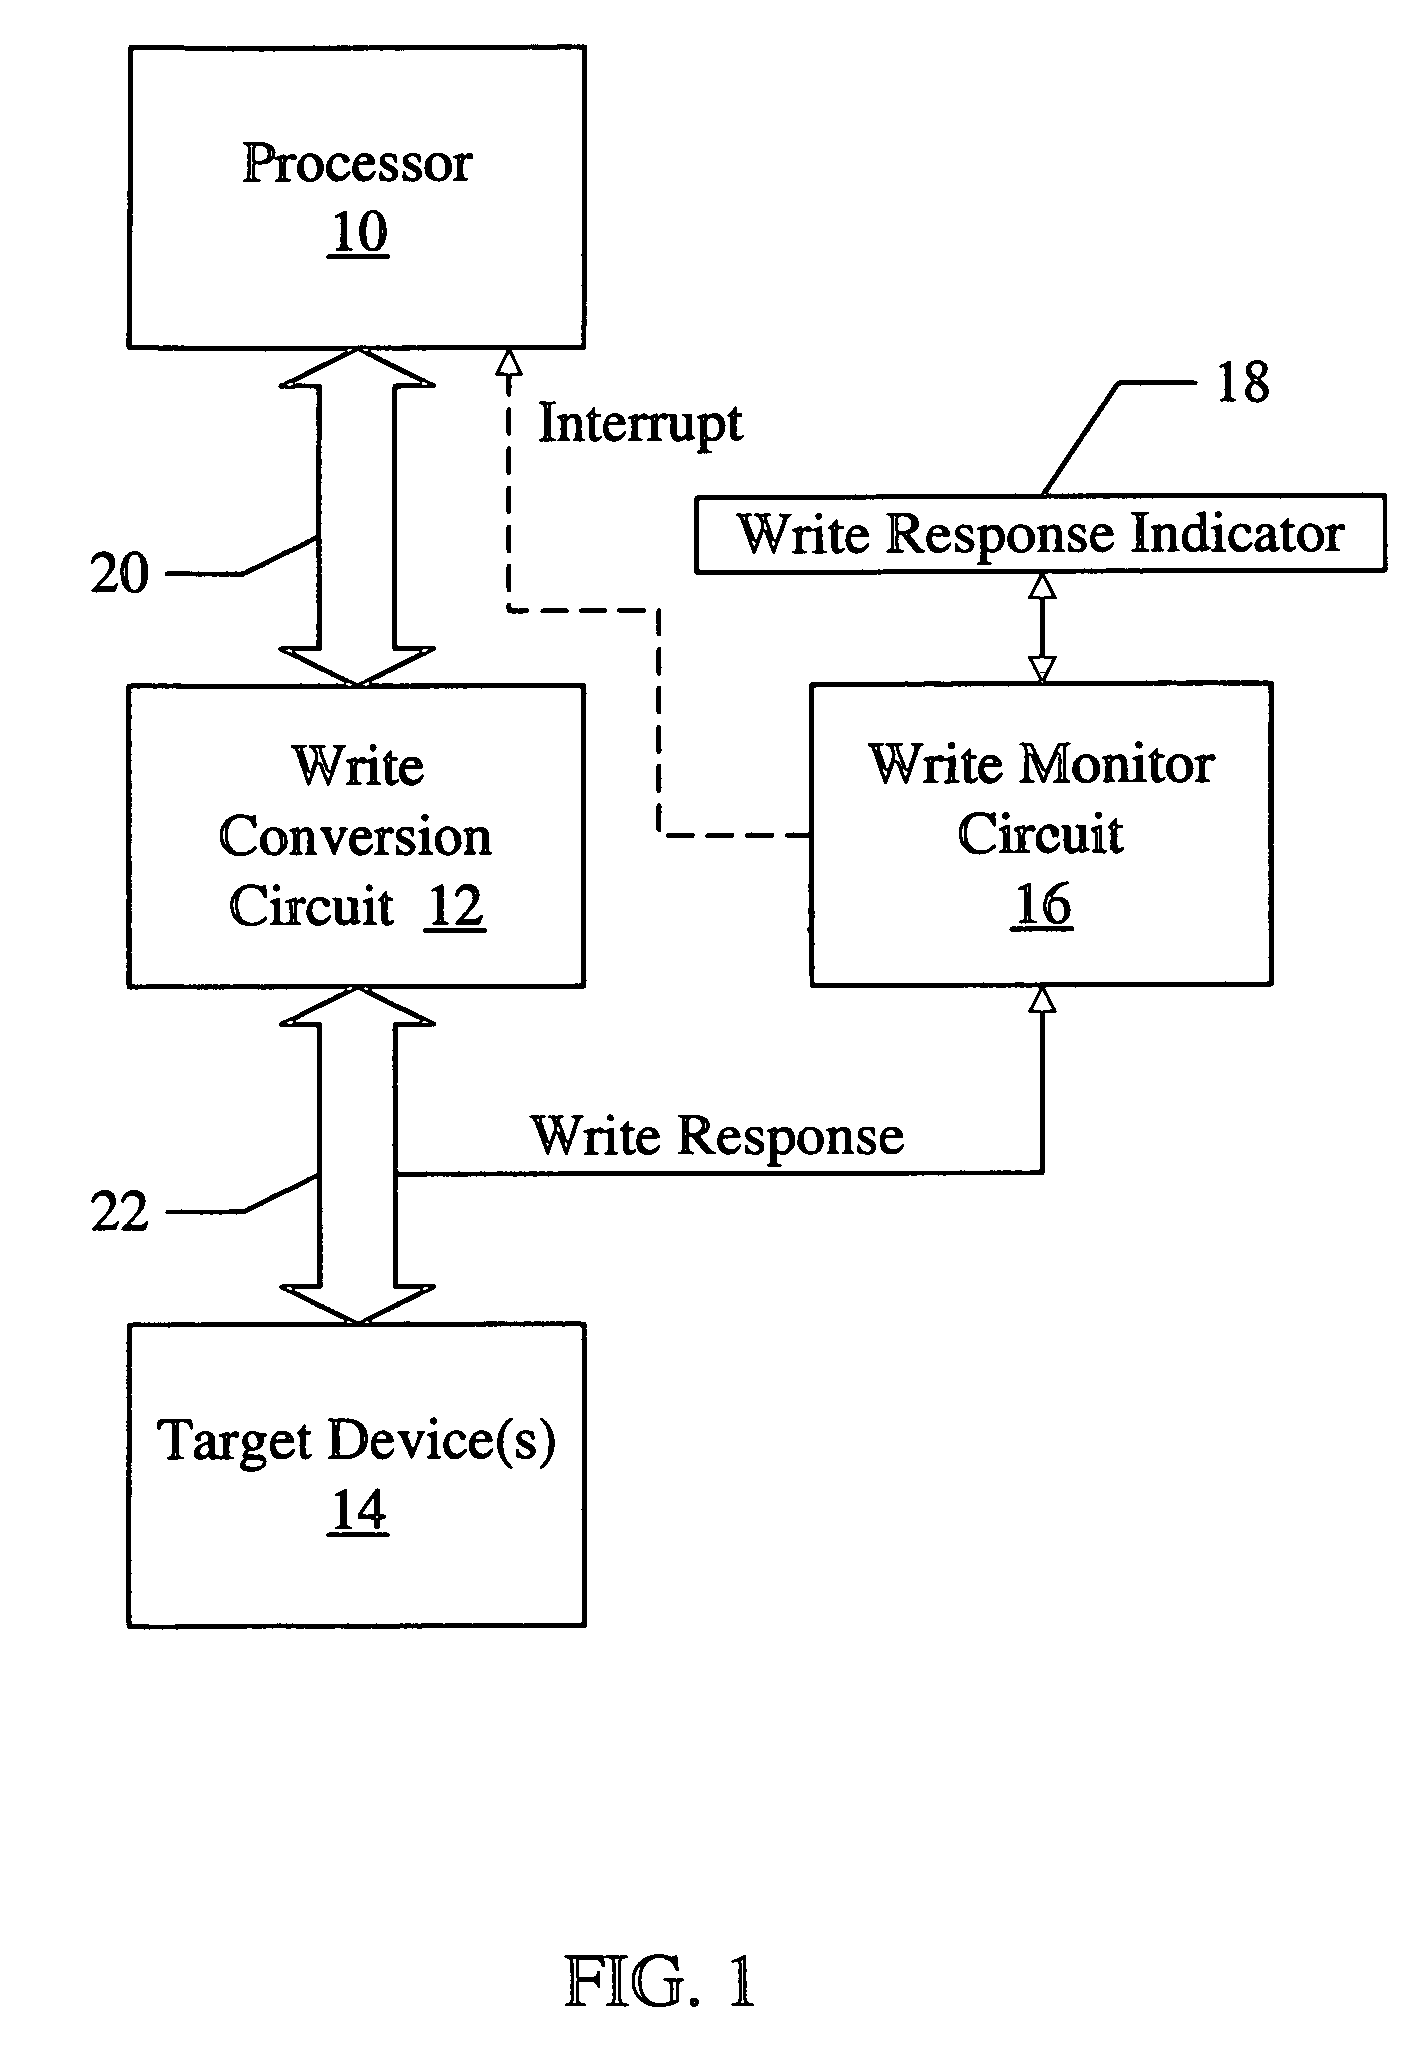 Tracking a non-posted writes in a system using a storage location to store a write response indicator when the non-posted write has reached a target device